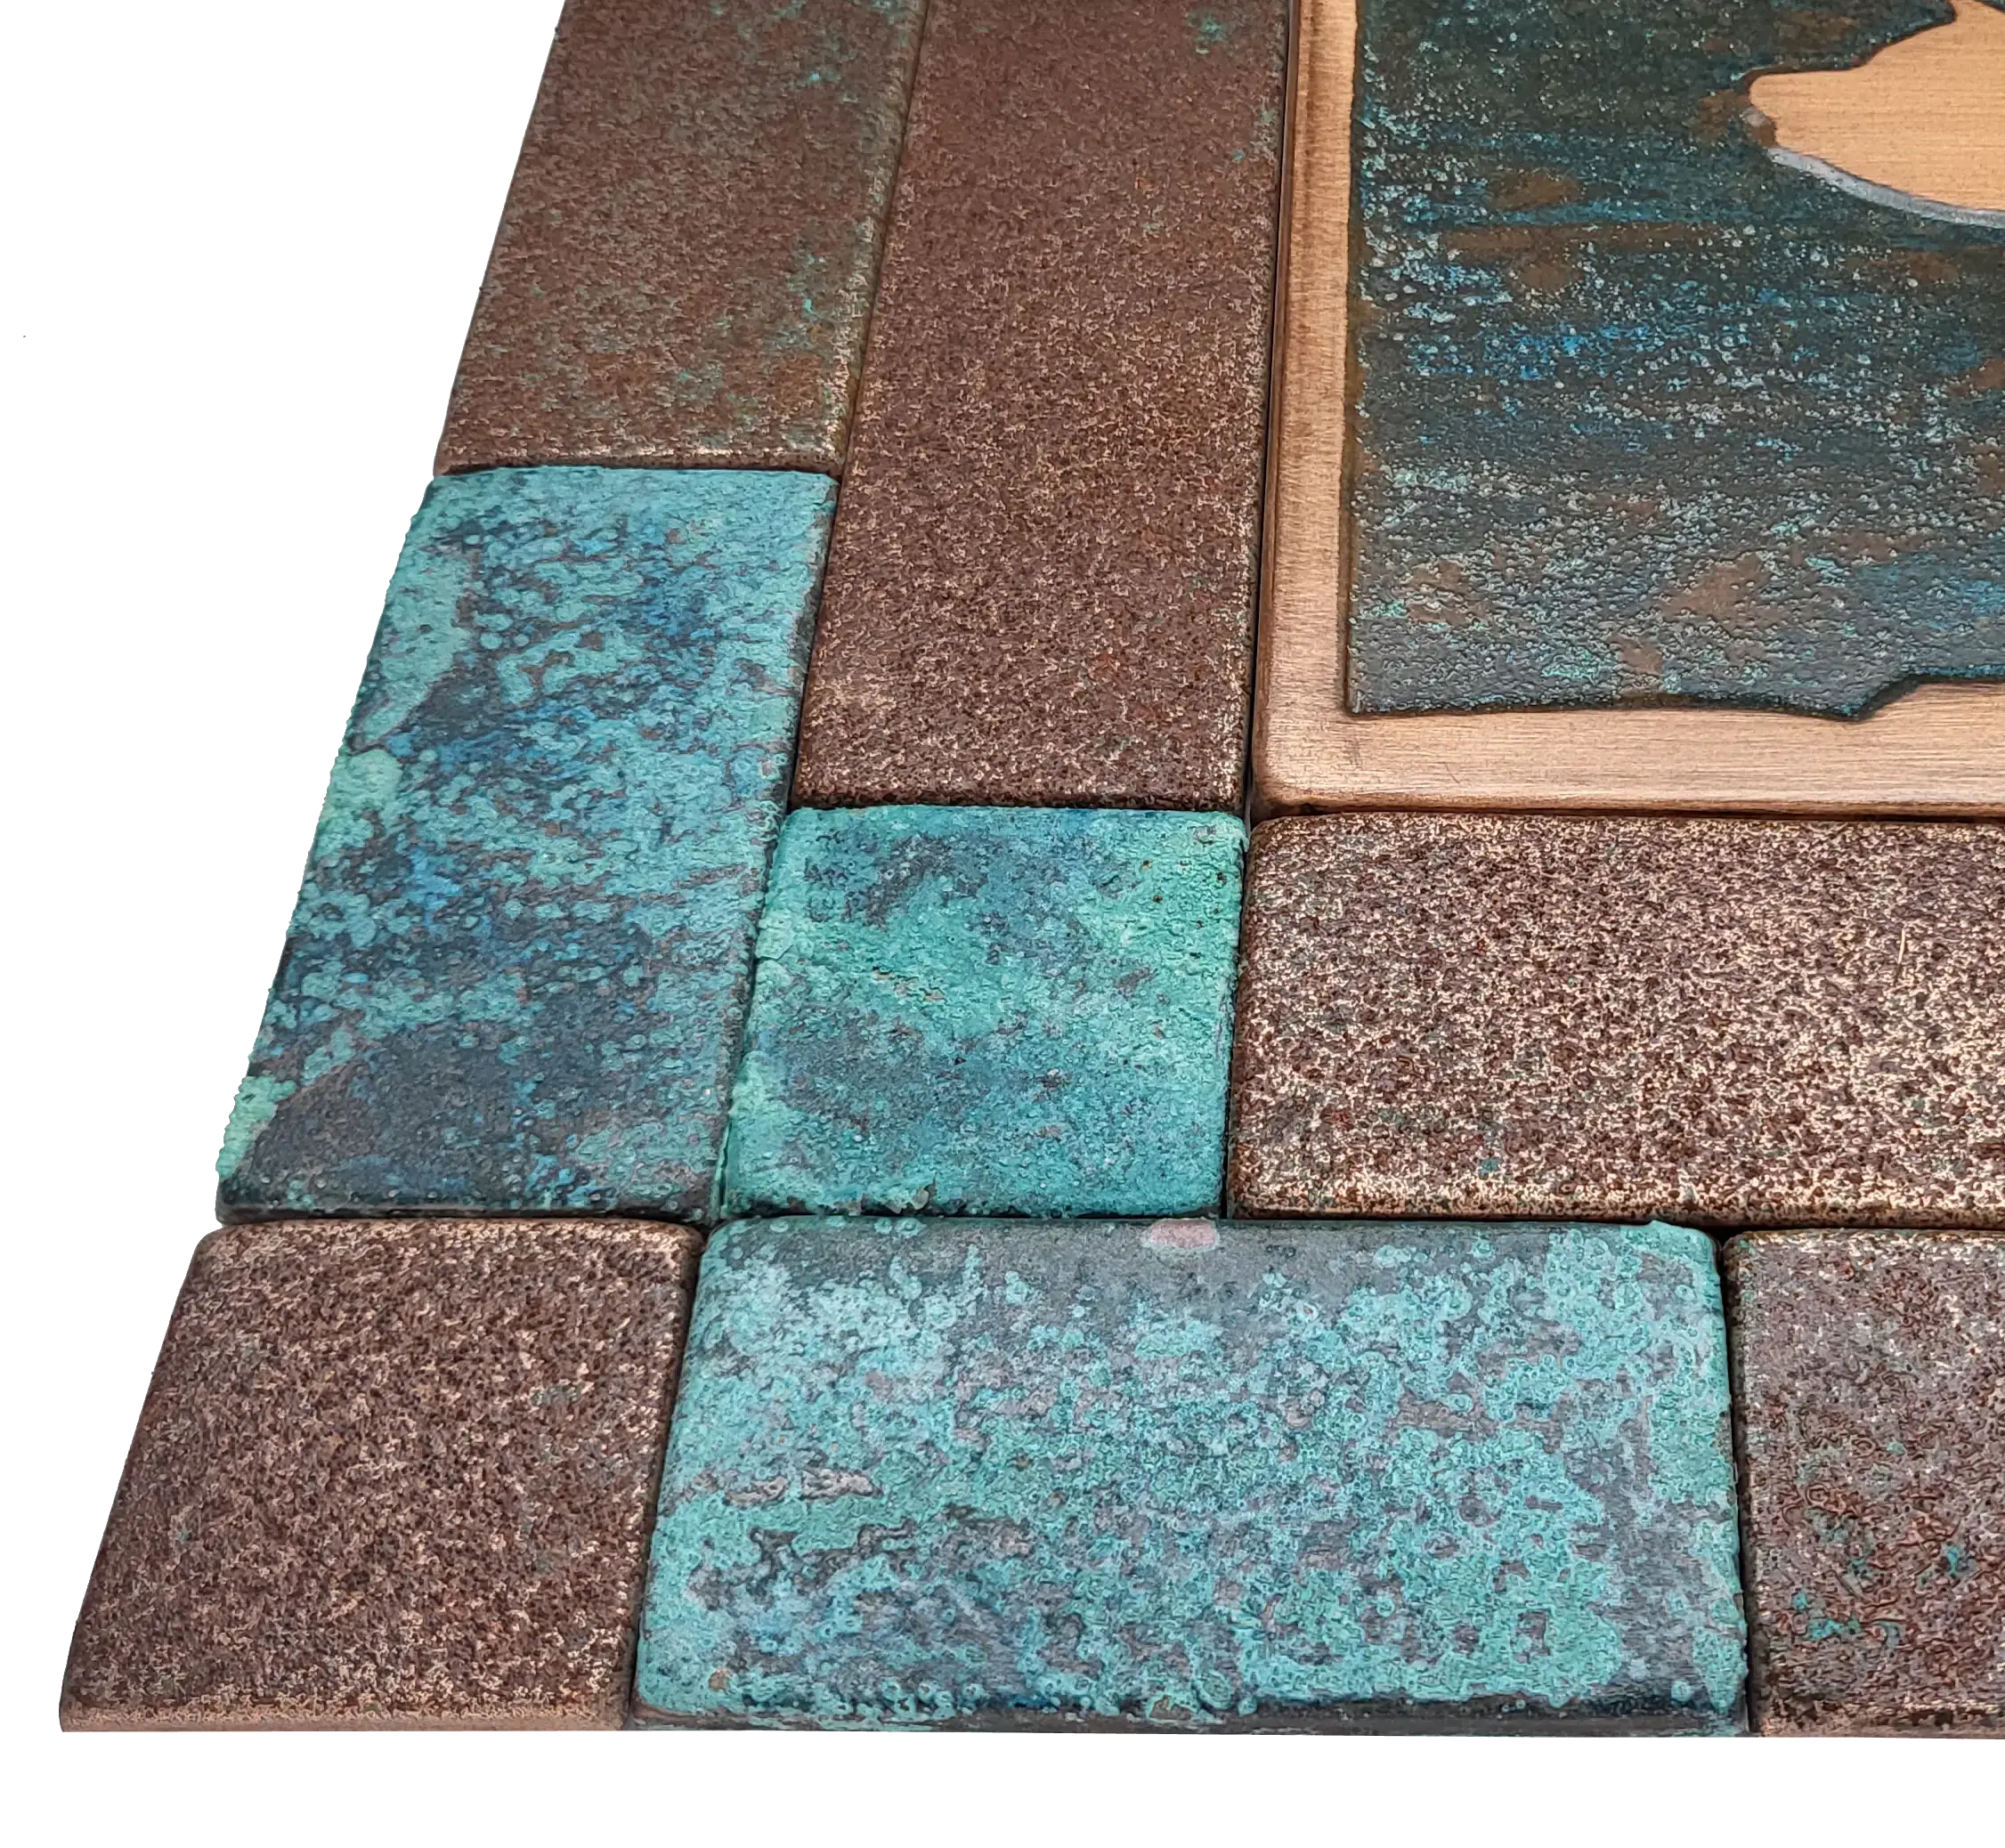 Bear and Mountains on colored copper 6 tiles